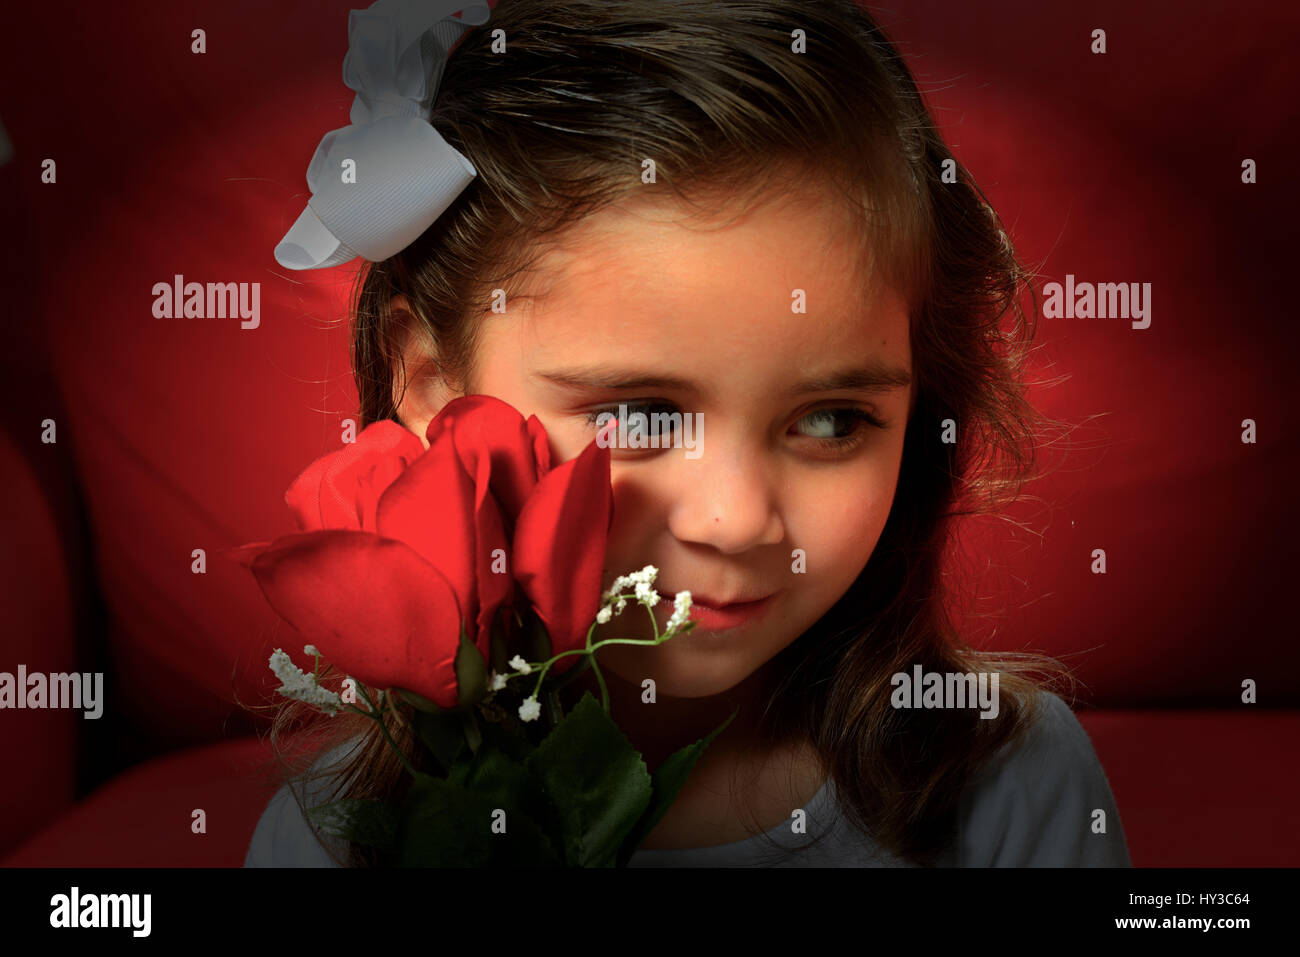 Valentines day on red sofa young girl posing with rose Stock Photo